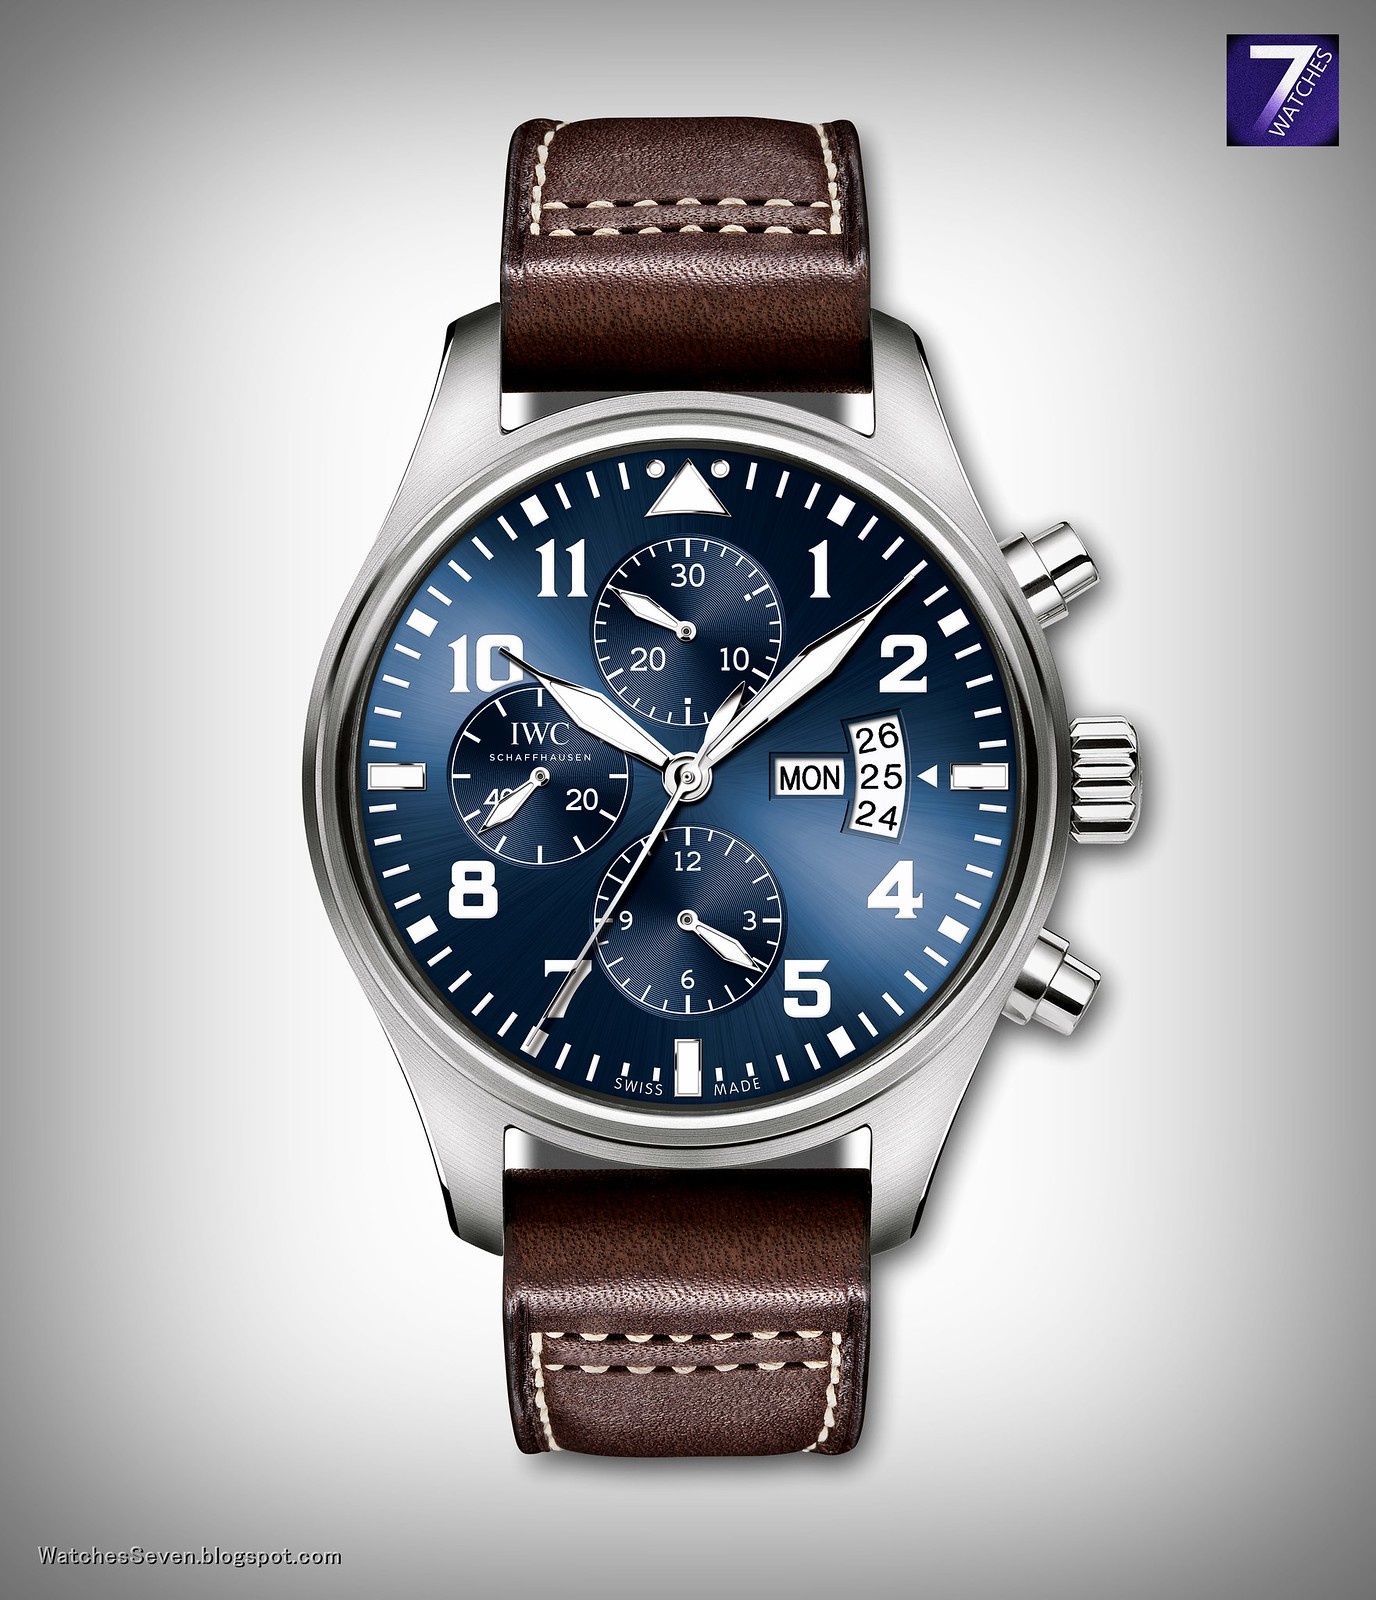 Watches 7: IWC – PILOTS Watch Chronograph Edition 